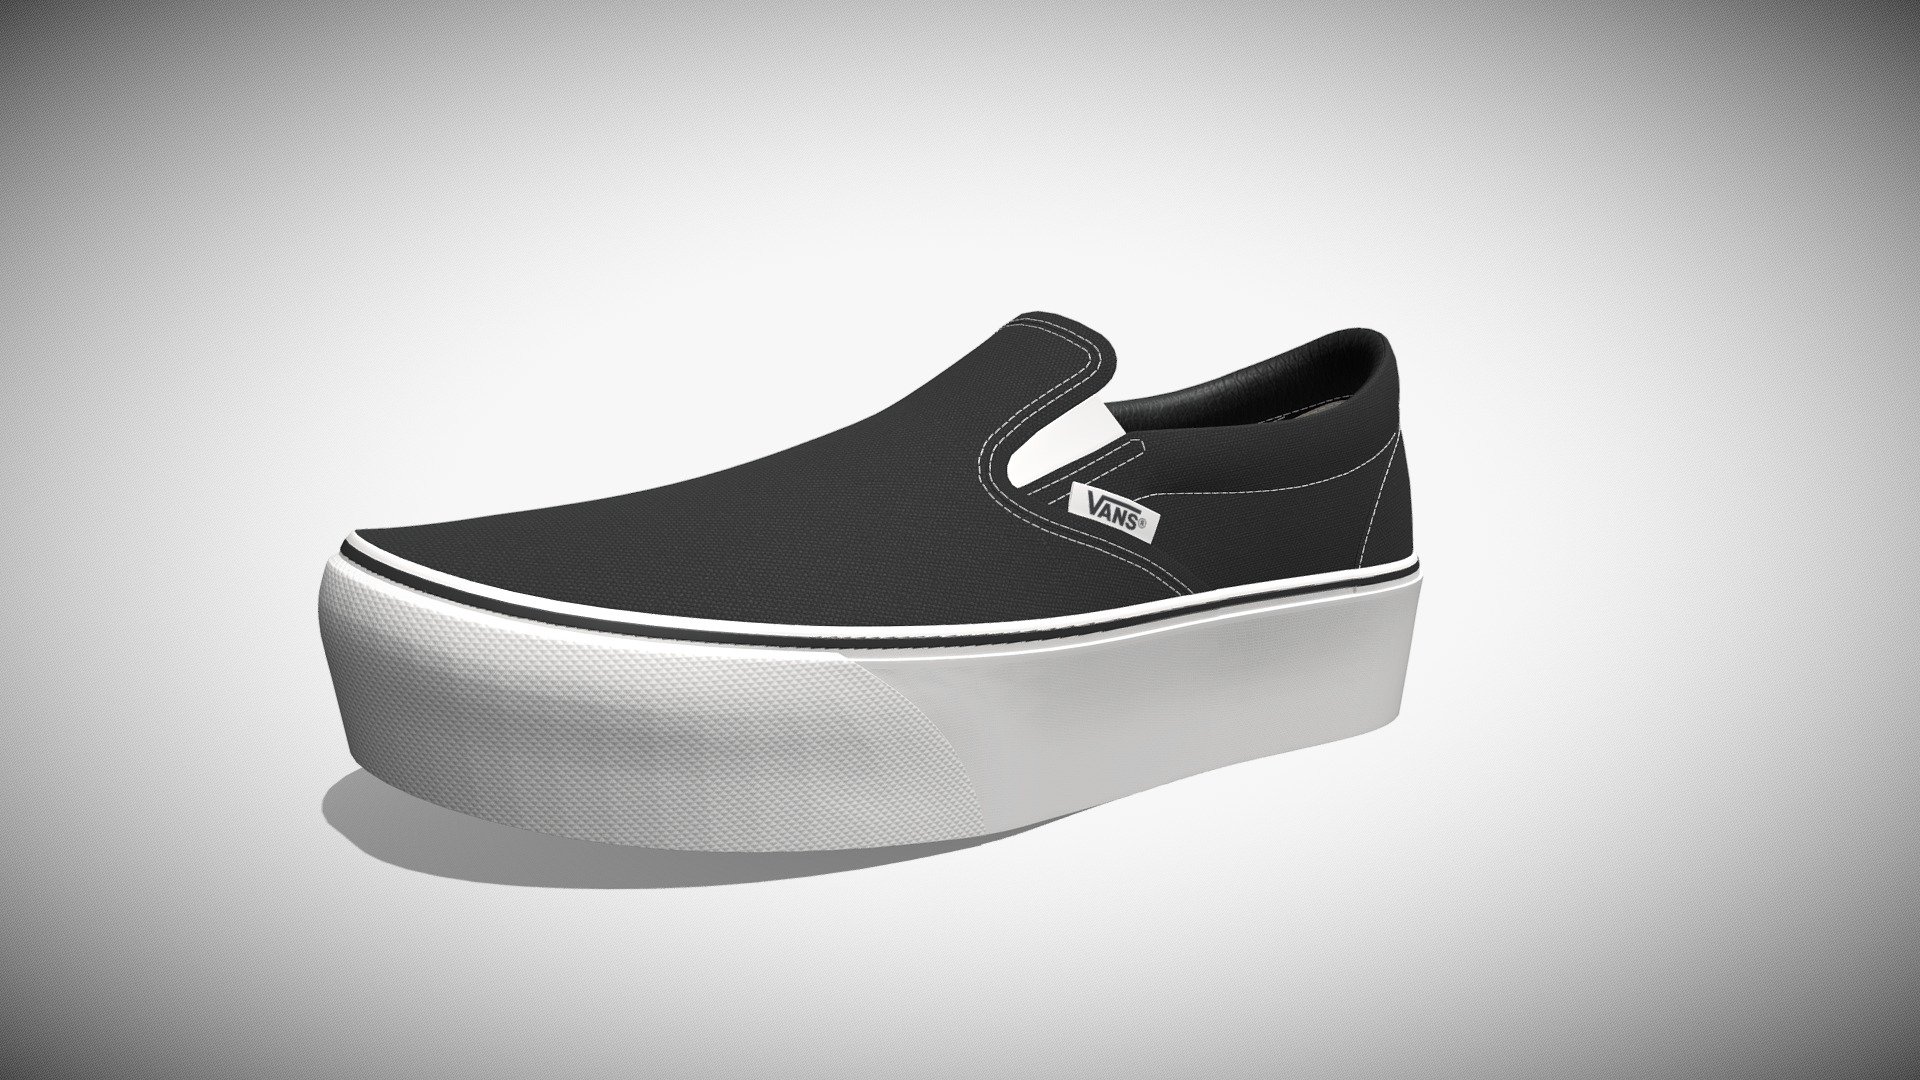 Detailed 3D model of a pair of Black And White Vans Classic Slip-On Platform sneakers, modeled in Cinema 4D. The model was created using approximate real world dimensions.

The model has 225,282 polys and 235,556 vertices.

An additional file has been provided containing the original Cinema 4D project file with both standard and v-ray materials, textures and other 3d format such as 3ds, fbx and obj. These files contain both the left and right pair of the shoes 3d model